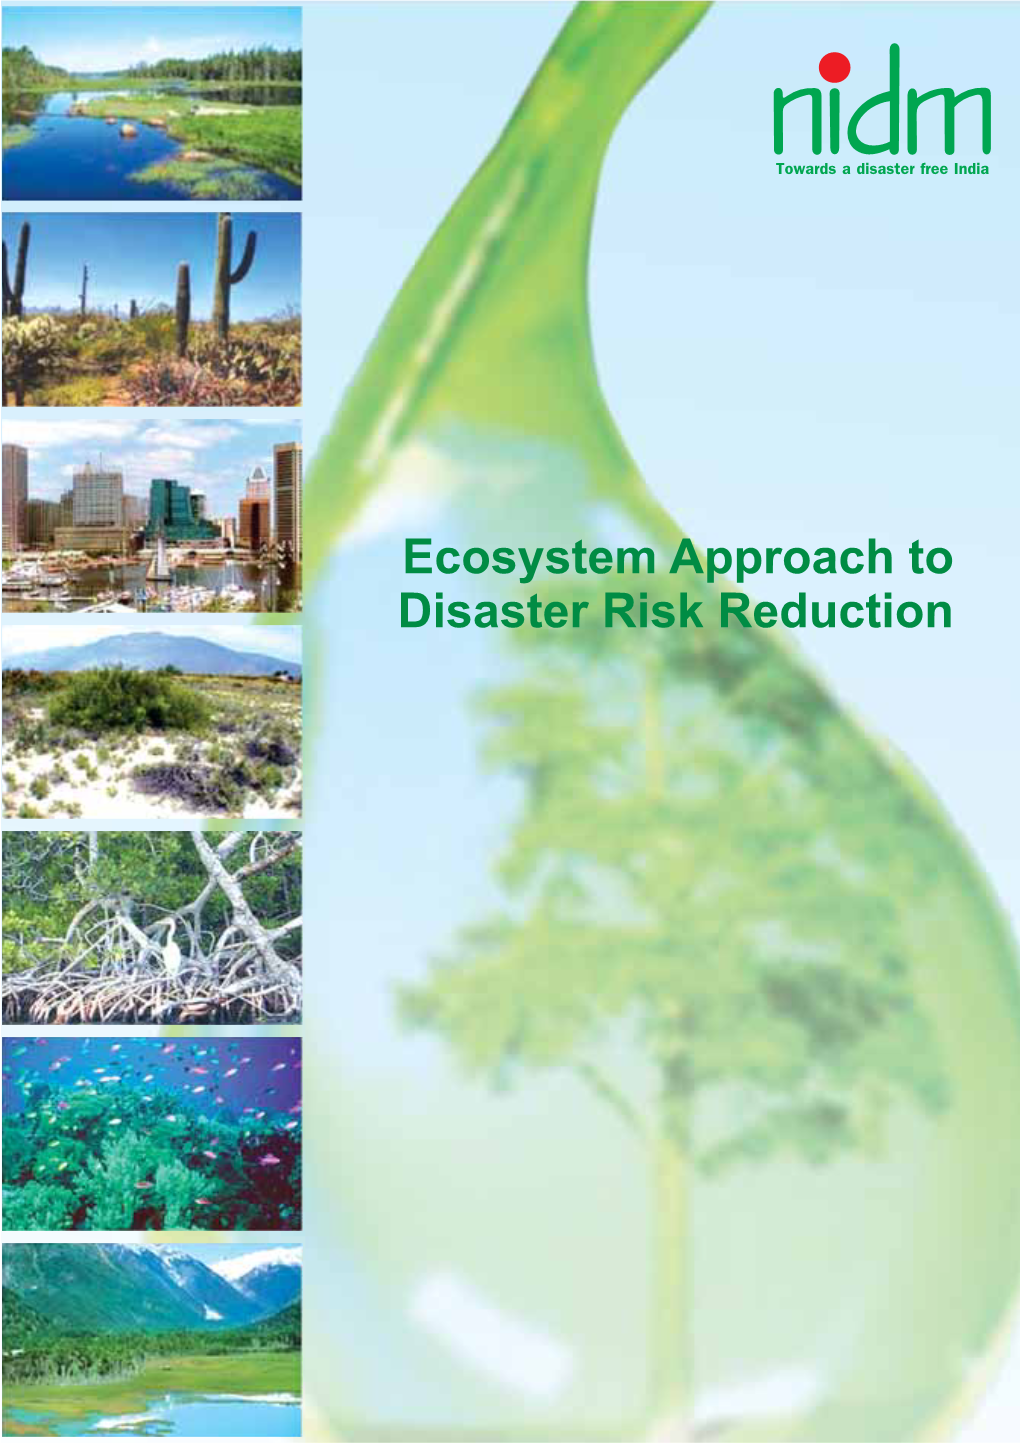 Ecosystem Approach to Disaster Risk Reduction Ecosystem Approach to Disaster Risk Reduction